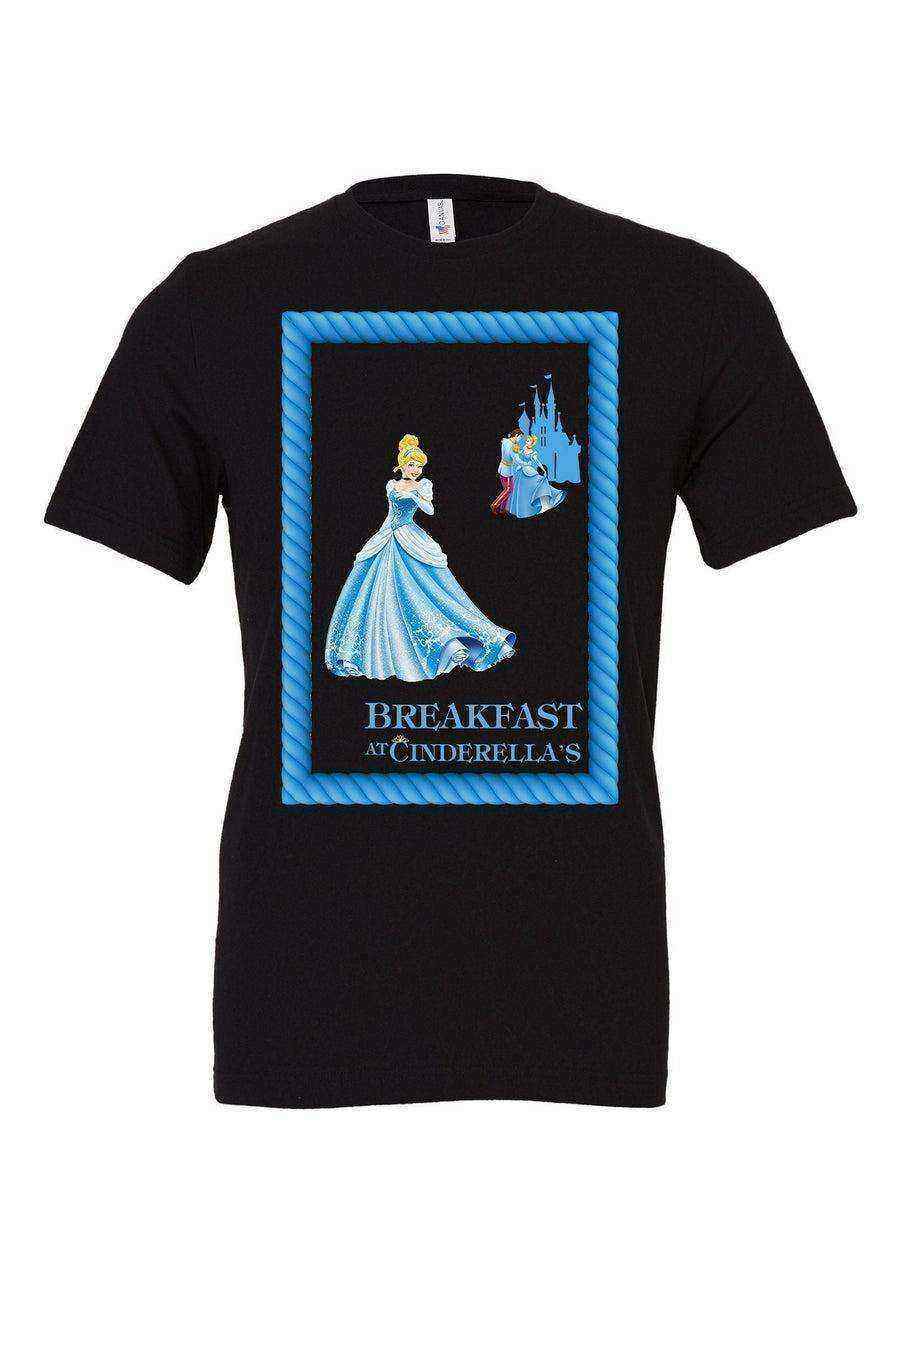 Toddler | Breakfast at Cinderella's Tee | Breakfast at Tiffany's - Dylan's Tees